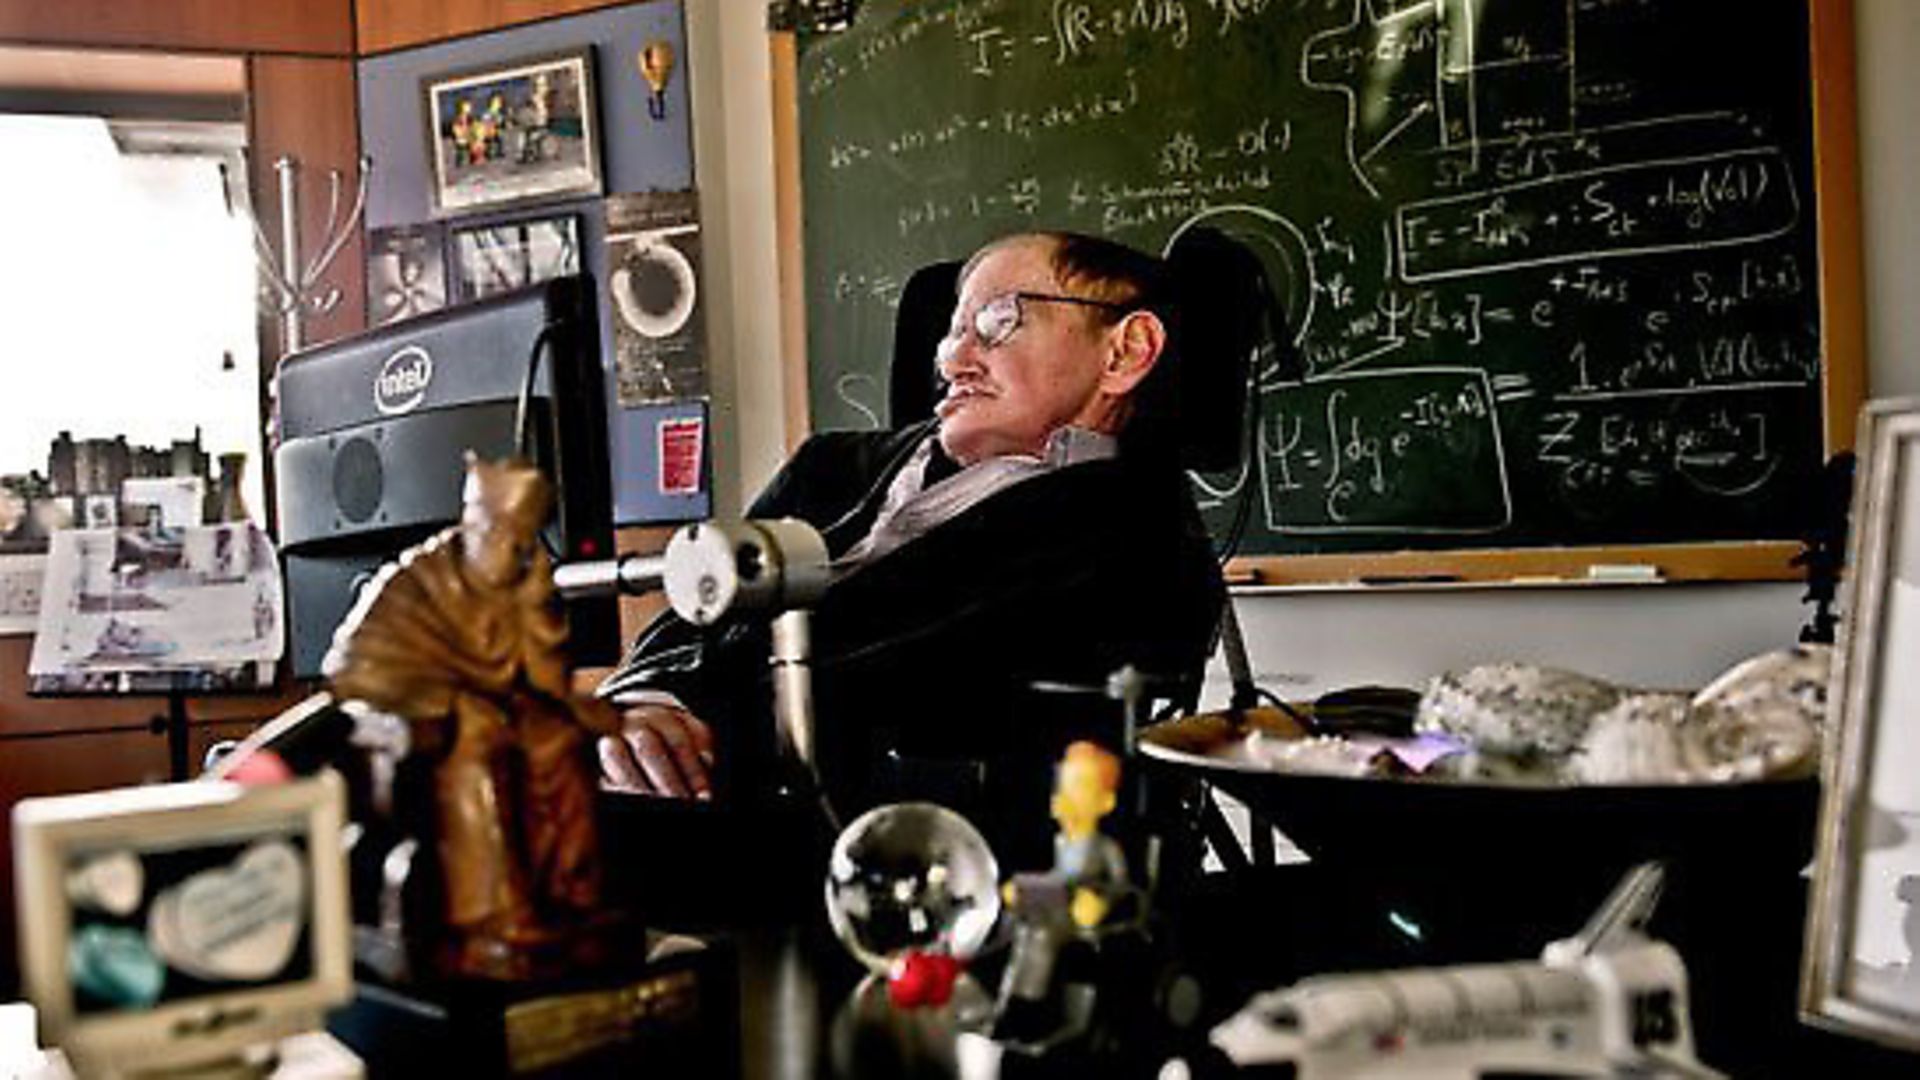 Science Museums photograph of Professor Stephen Hawking in his office at University of Cambridge, where he is director of research for the Department of Applied Mathematics and Theoretical Physics and founder of the Centre for Theoretical Cosmology. Science Museum/Sarah Lee. - Credit: Science Museum / Sarah Lee